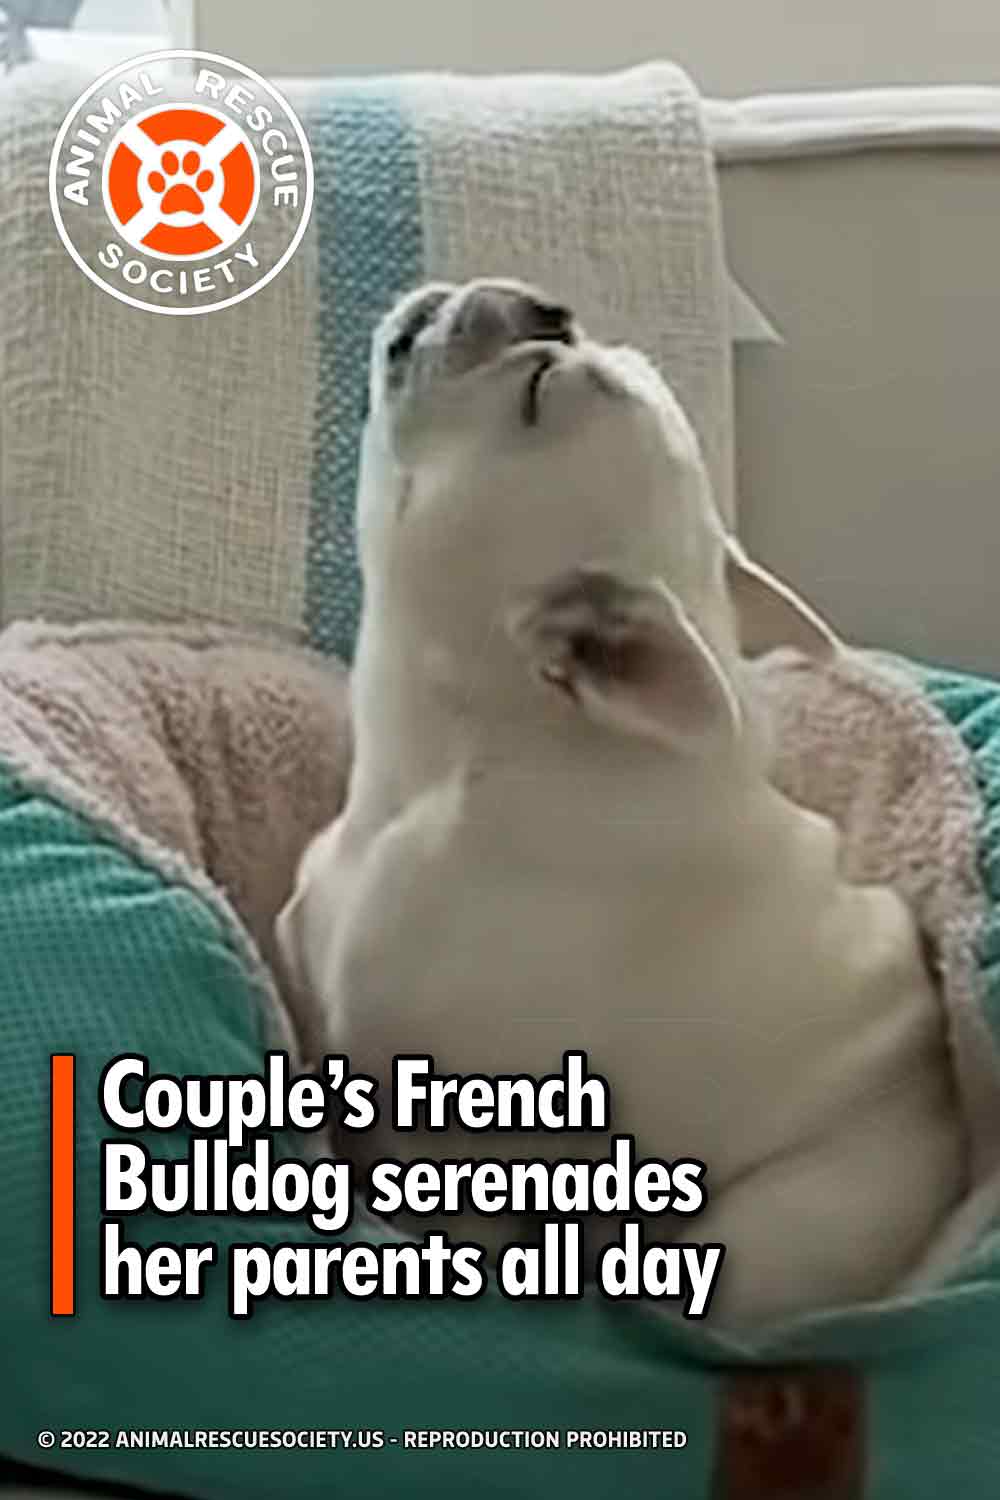 Couple’s French Bulldog serenades her parents all day